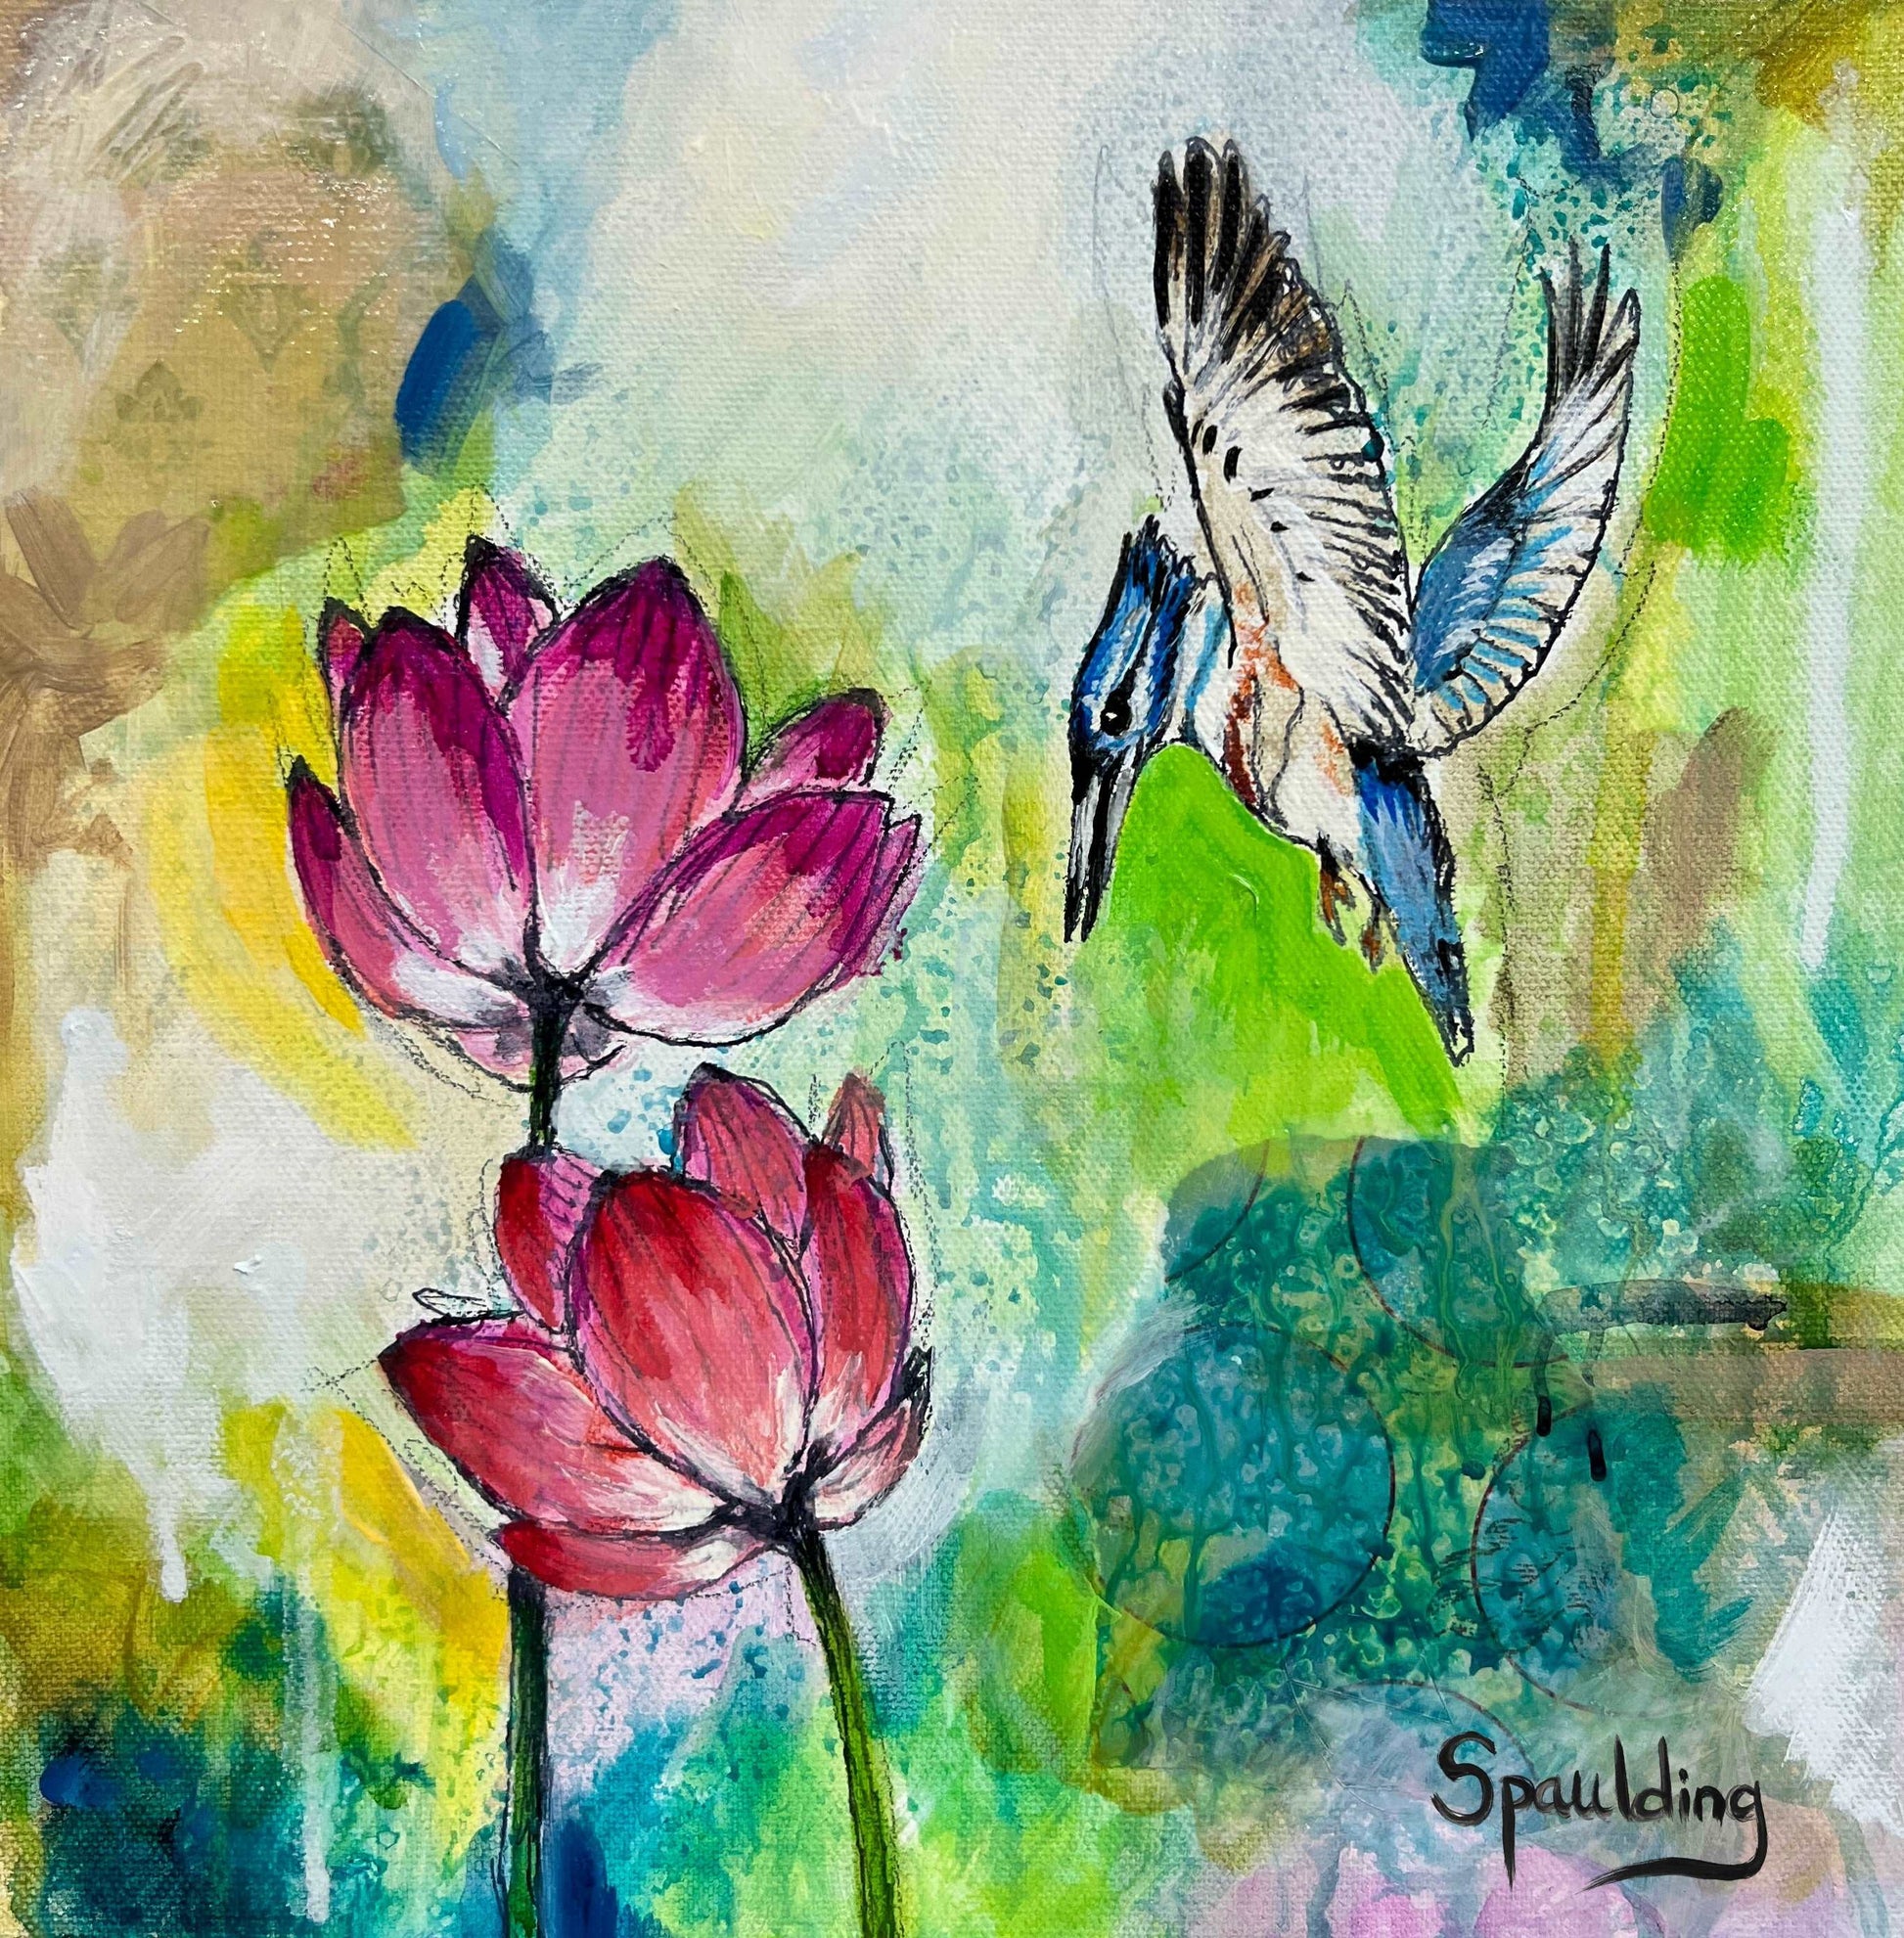  A kingfisher dives towards pink lotus flowers, set against a vibrant, green and blue mixed-media background.